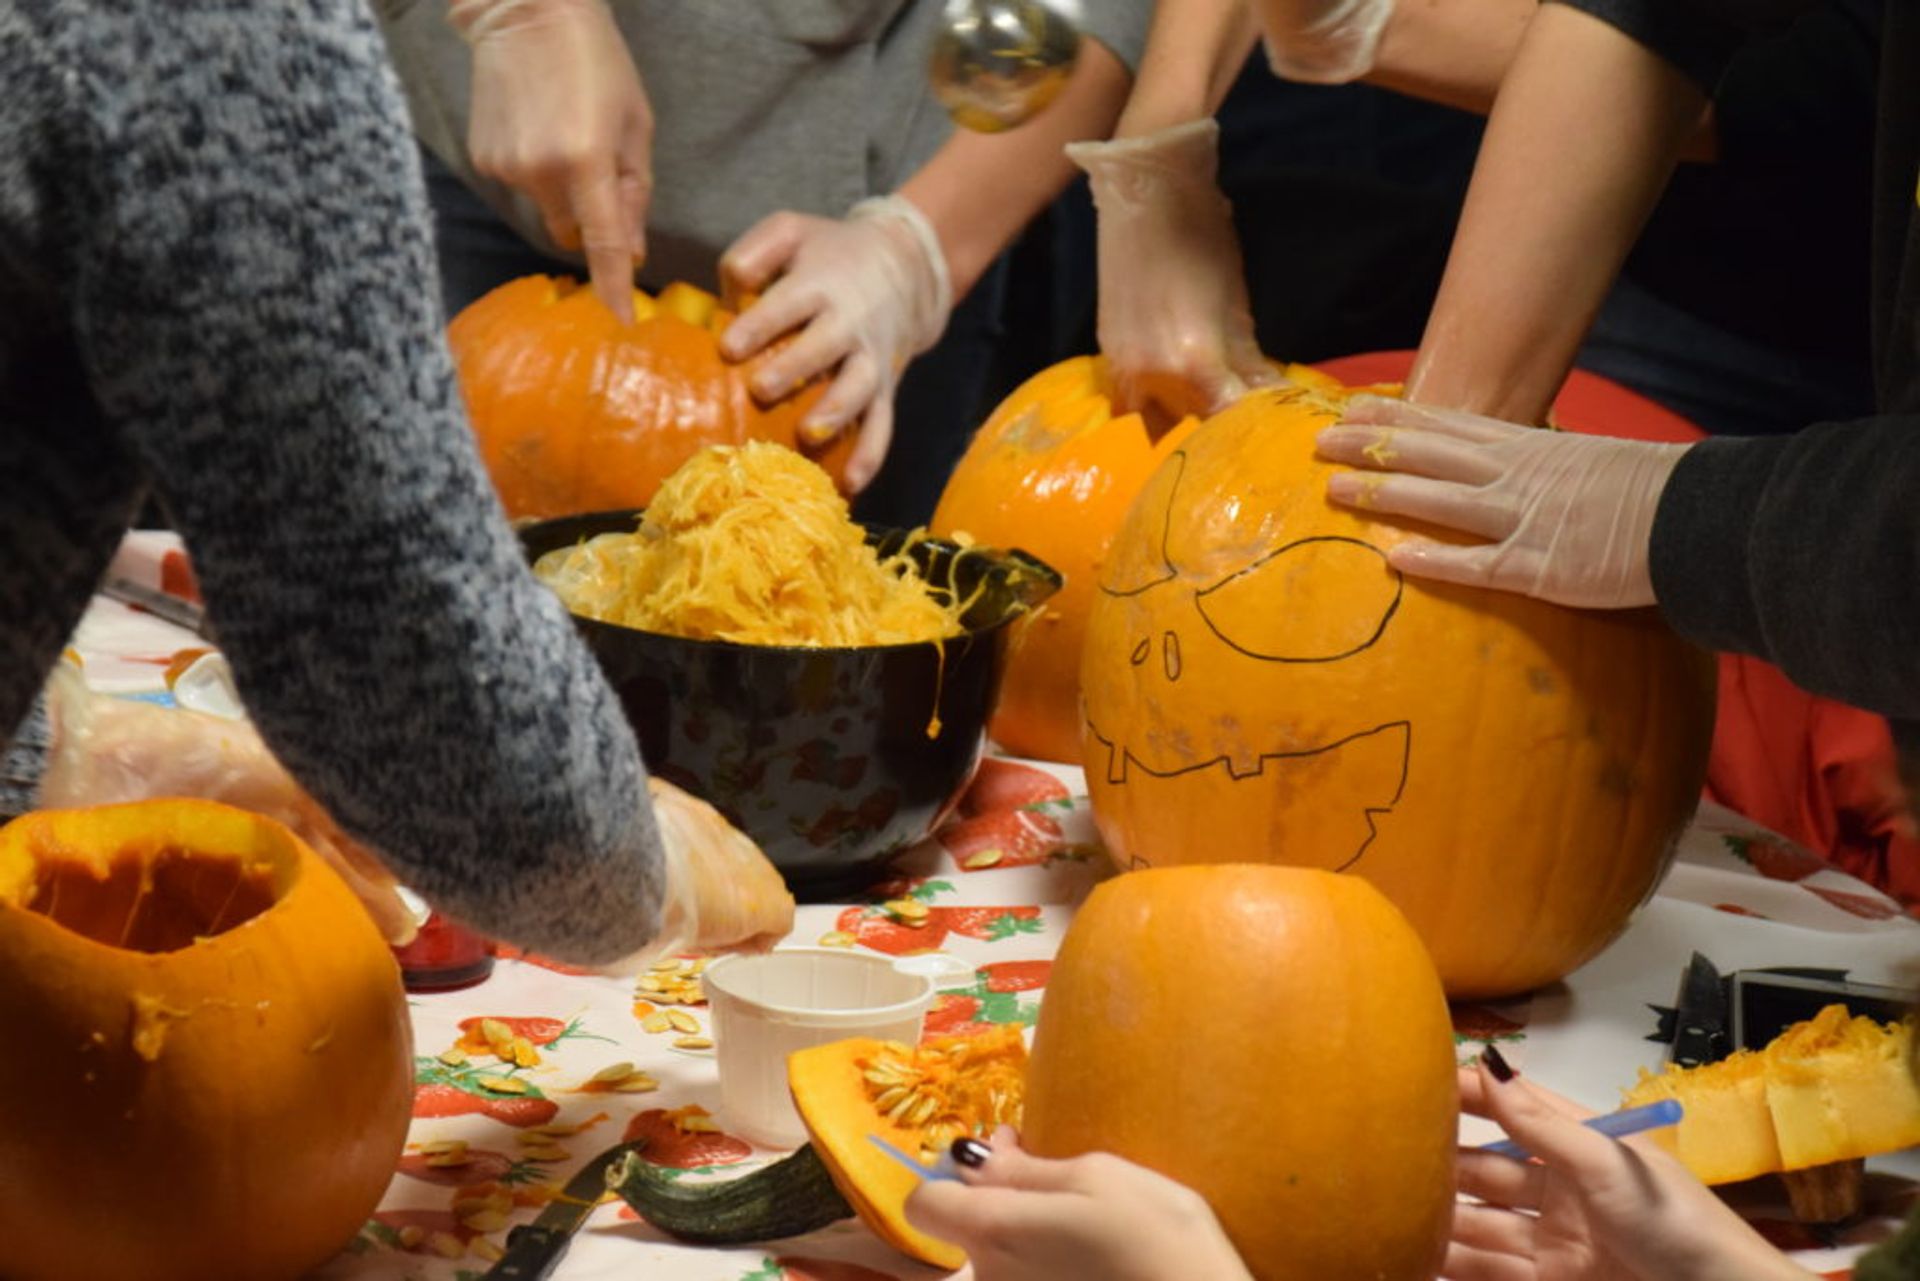 Pumpkin carving for Halloween - How scary can it get? - Study in Sweden